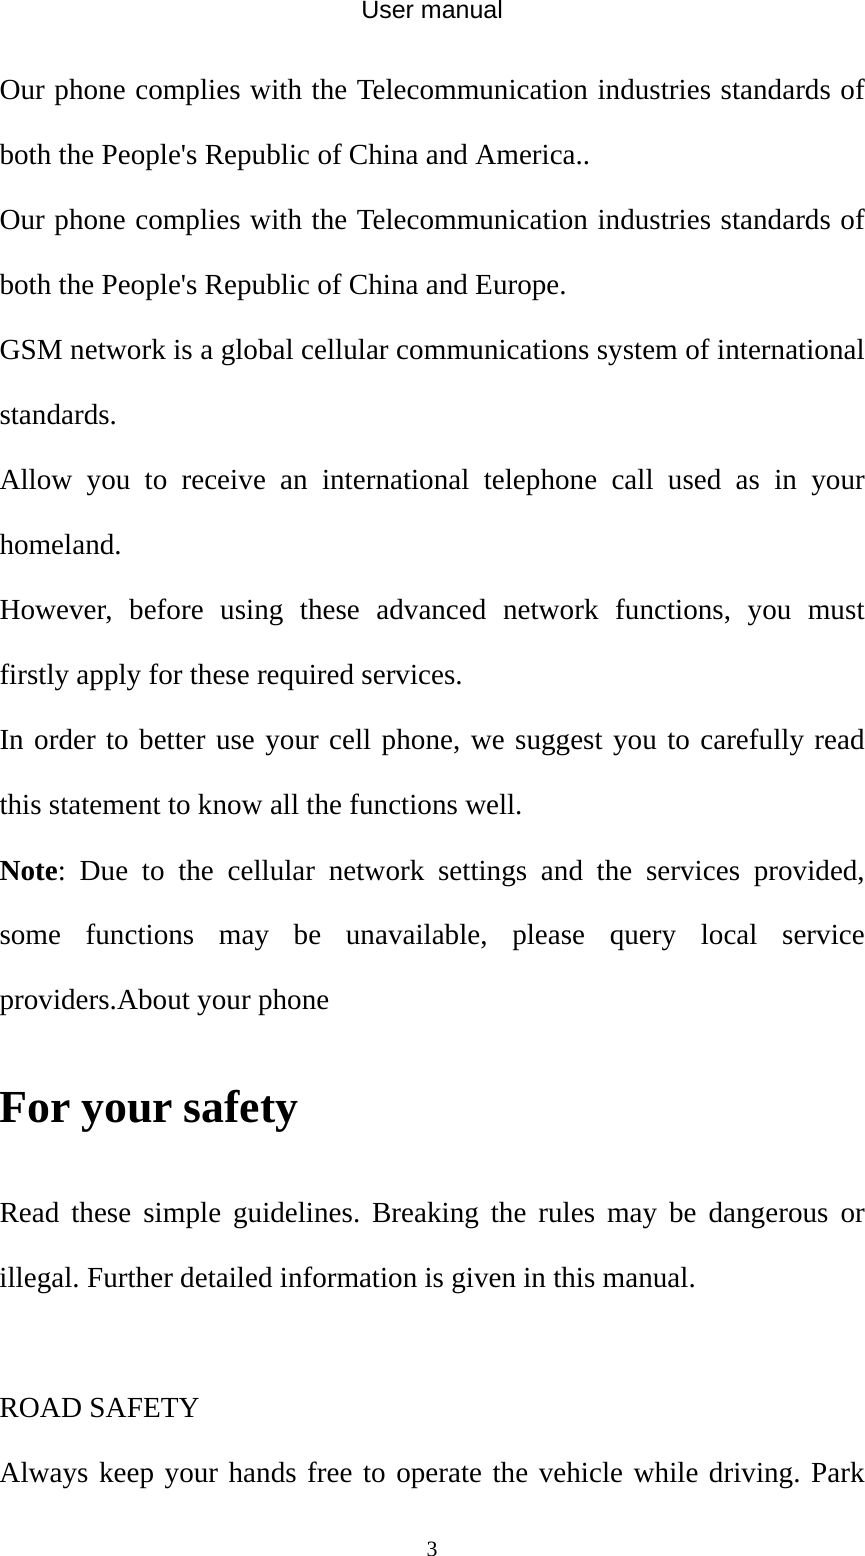 User manual  3Our phone complies with the Telecommunication industries standards of both the People&apos;s Republic of China and America.. Our phone complies with the Telecommunication industries standards of both the People&apos;s Republic of China and Europe. GSM network is a global cellular communications system of international standards.  Allow you to receive an international telephone call used as in your homeland. However, before using these advanced network functions, you must firstly apply for these required services. In order to better use your cell phone, we suggest you to carefully read this statement to know all the functions well. Note: Due to the cellular network settings and the services provided, some functions may be unavailable, please query local service providers.About your phone   For your safety Read these simple guidelines. Breaking the rules may be dangerous or illegal. Further detailed information is given in this manual.  ROAD SAFETY   Always keep your hands free to operate the vehicle while driving. Park 